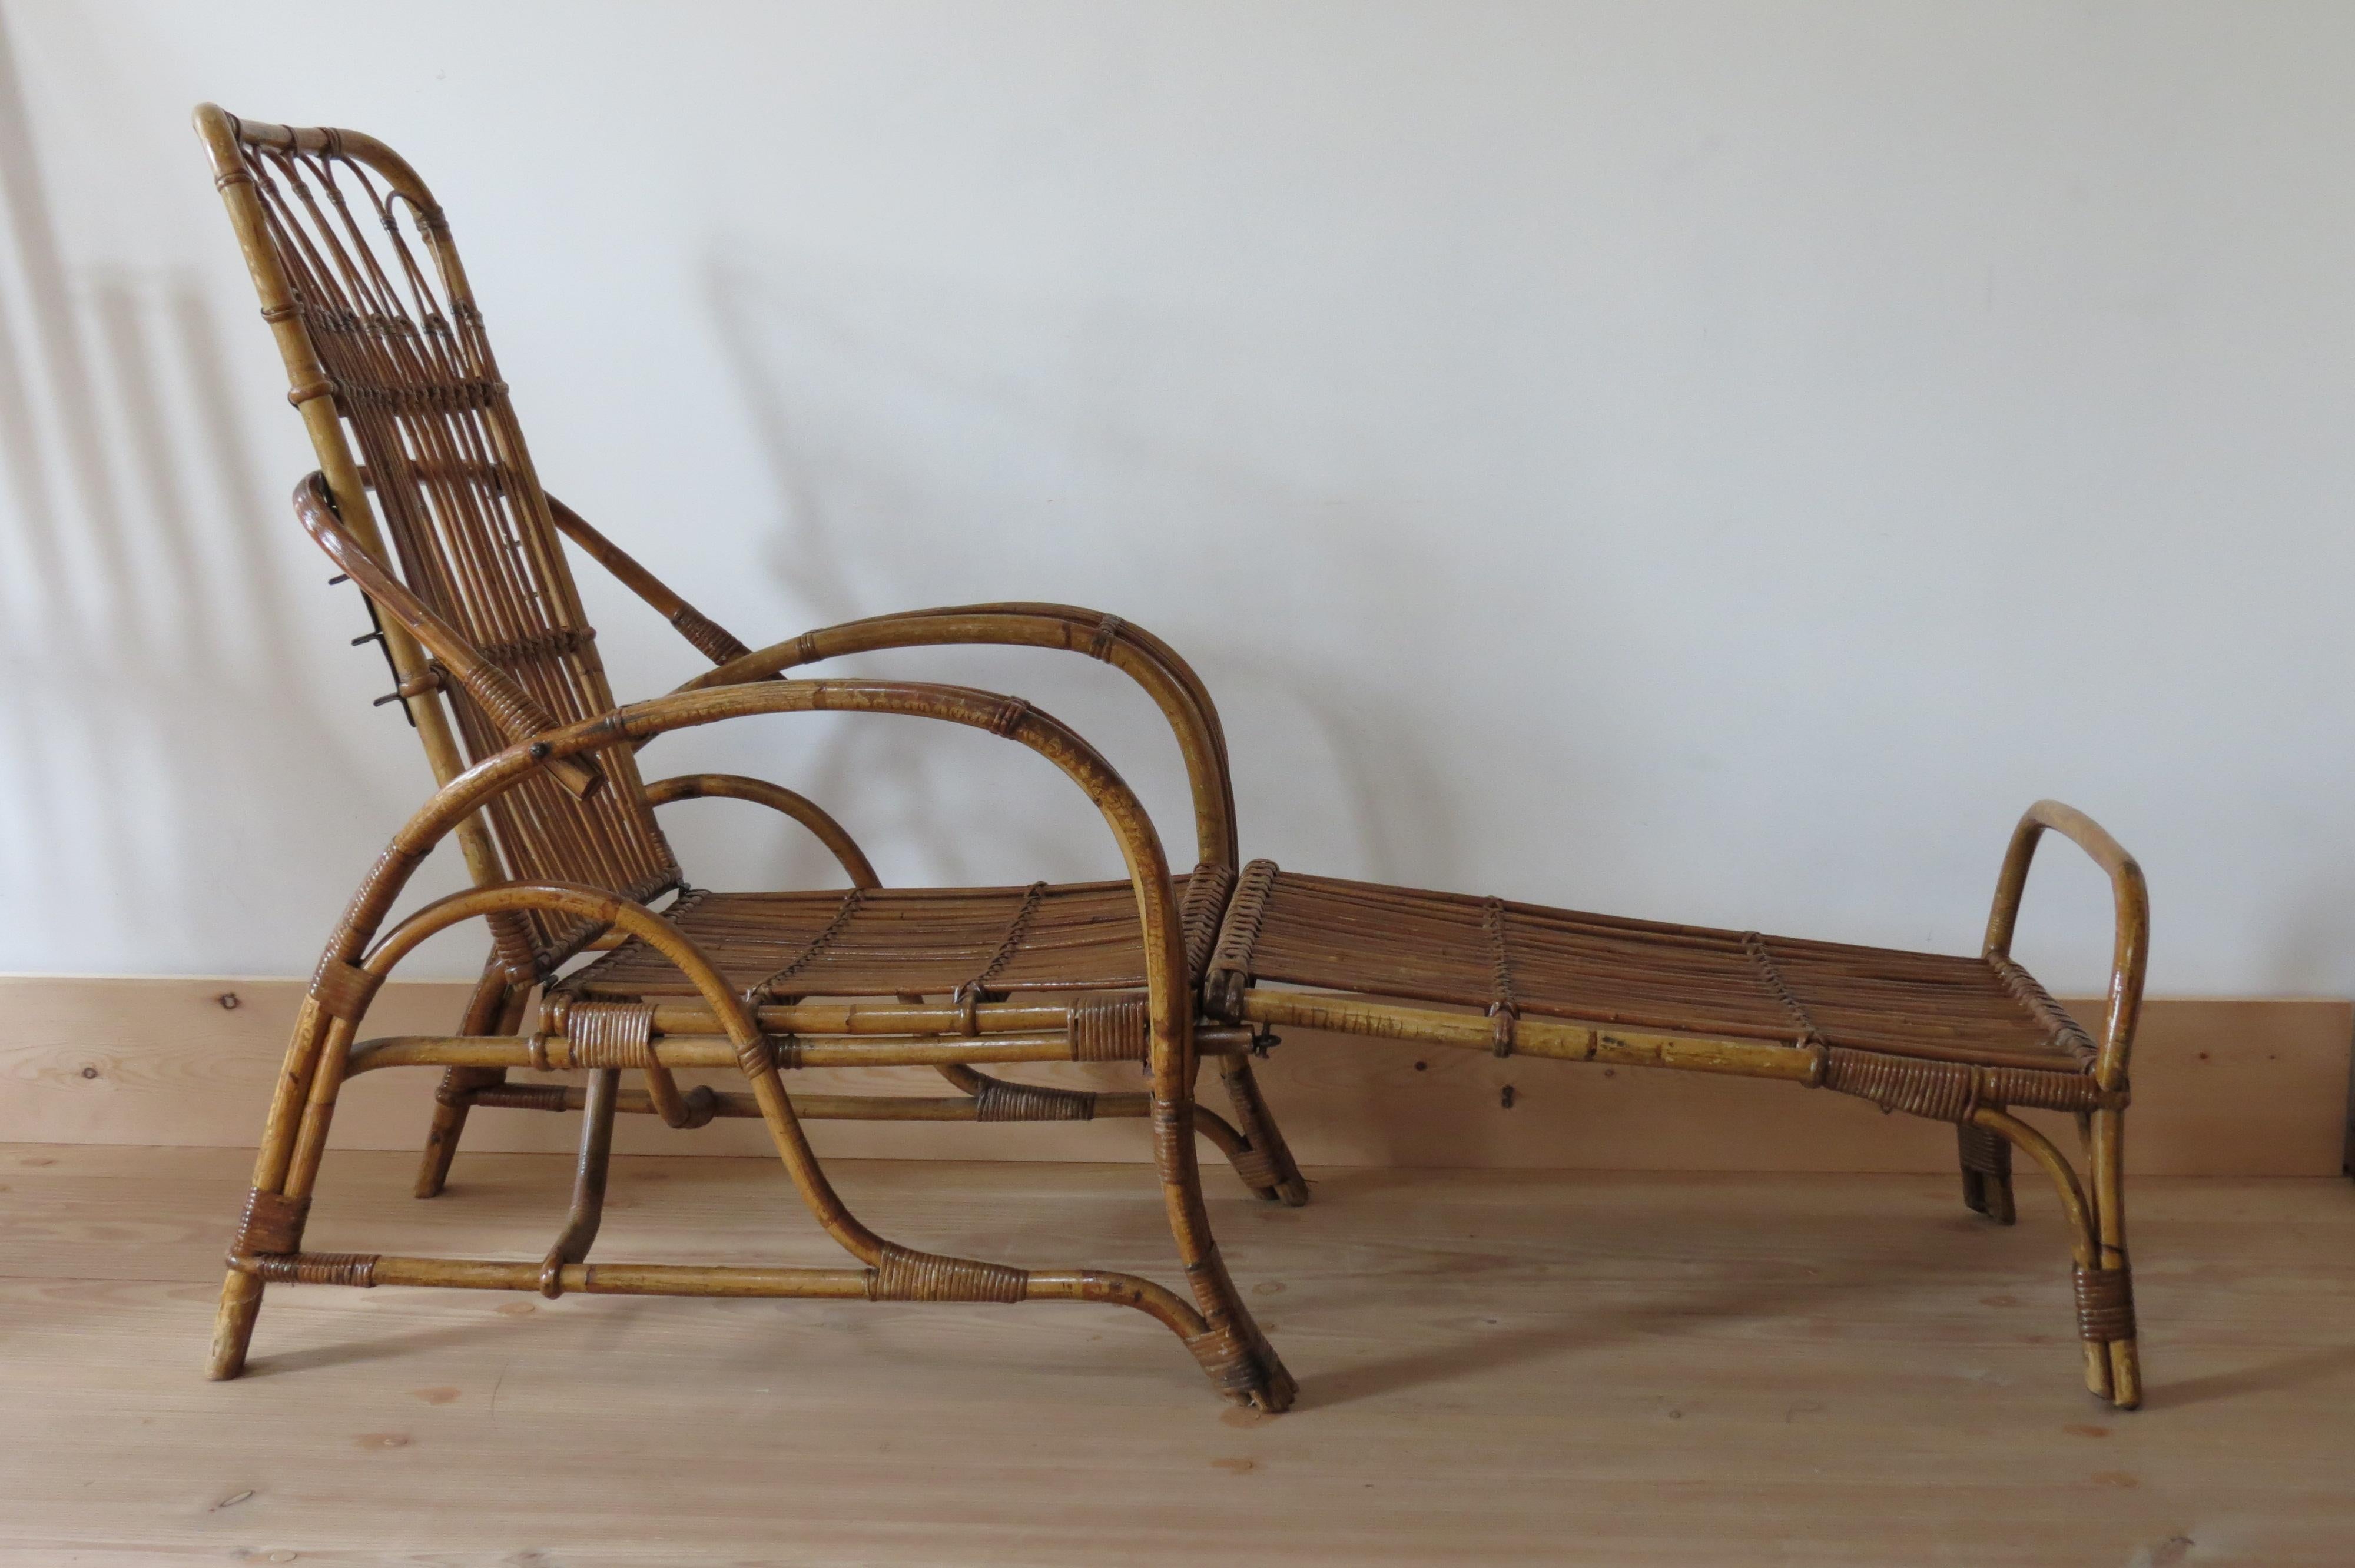 A very stylish 1920s steam bent cane and bamboo chair with detachable footstool. Adjustable backrest allows the chair to recline into several positions. The footstool detaches so the chair can be used independently.  Can be used indoors or outdoors.